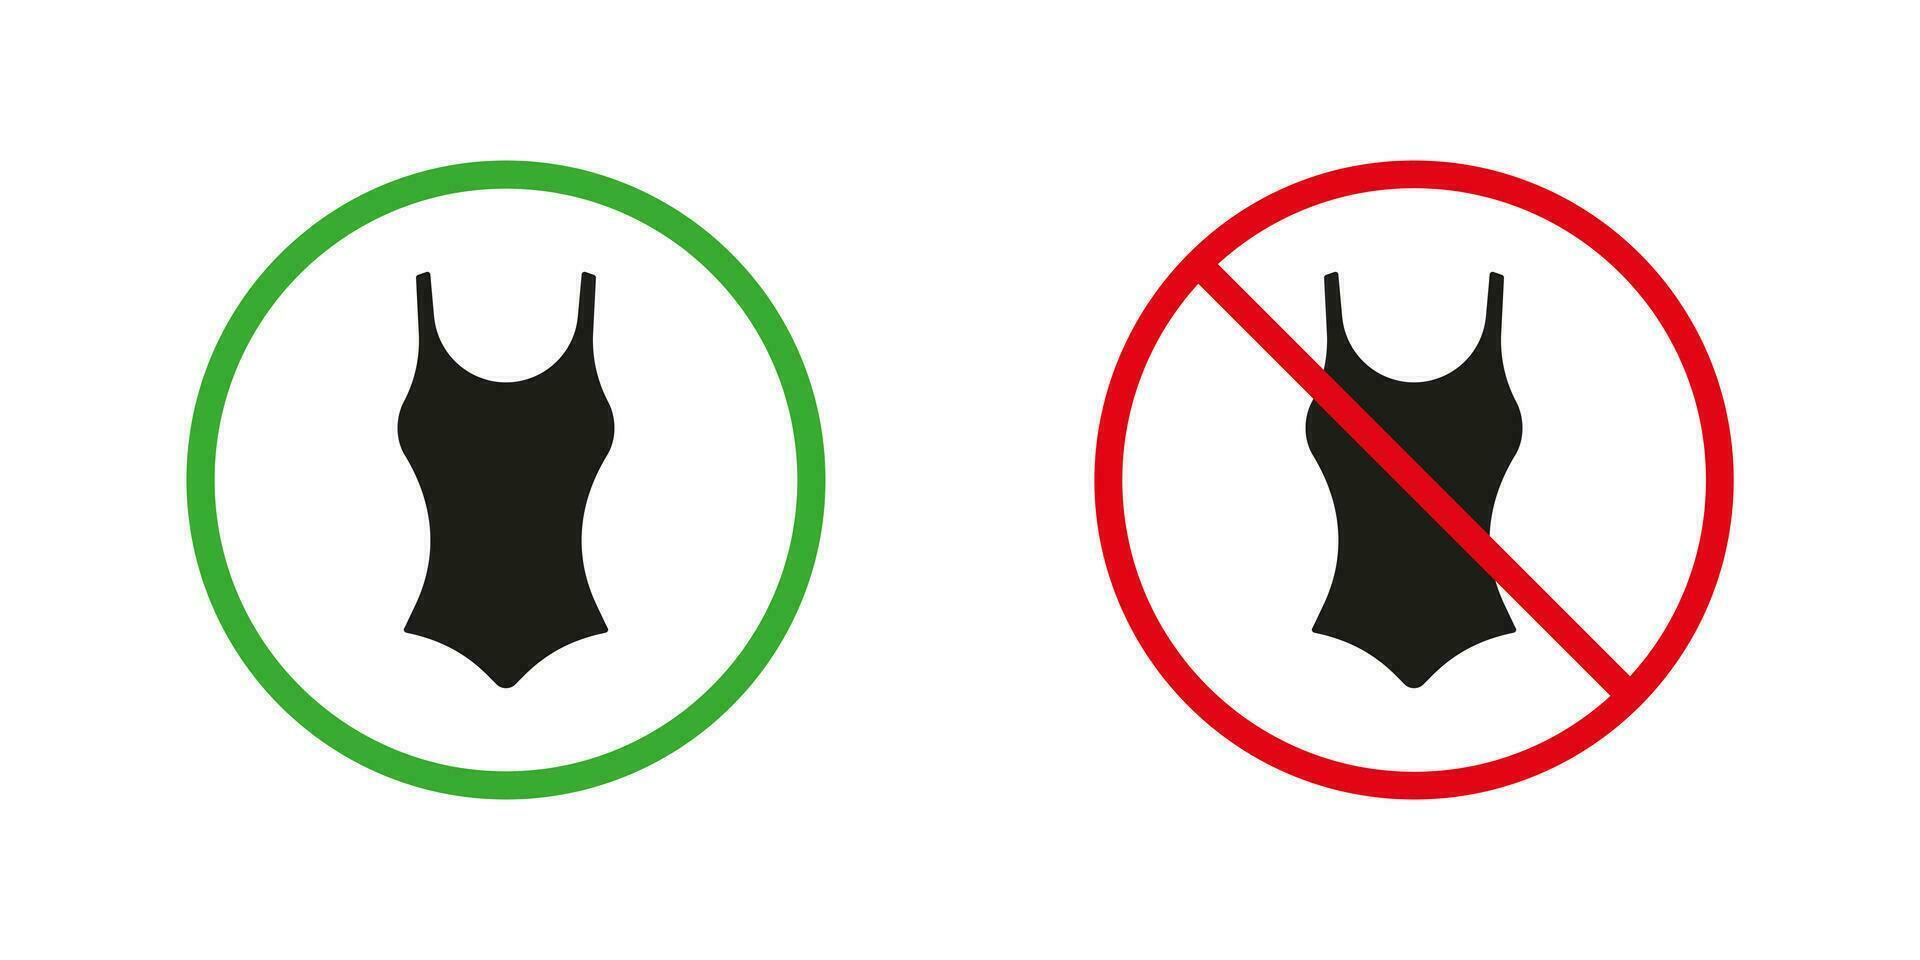 Girl Summer Swimwear Warning Solid Signs. Swim Clothing Silhouette Icons Set. Allowed and Prohibited Women One Piece Bikini Swimsuit Glyph Pictogram. Nude Beach Sign. Isolated Vector Illustration.